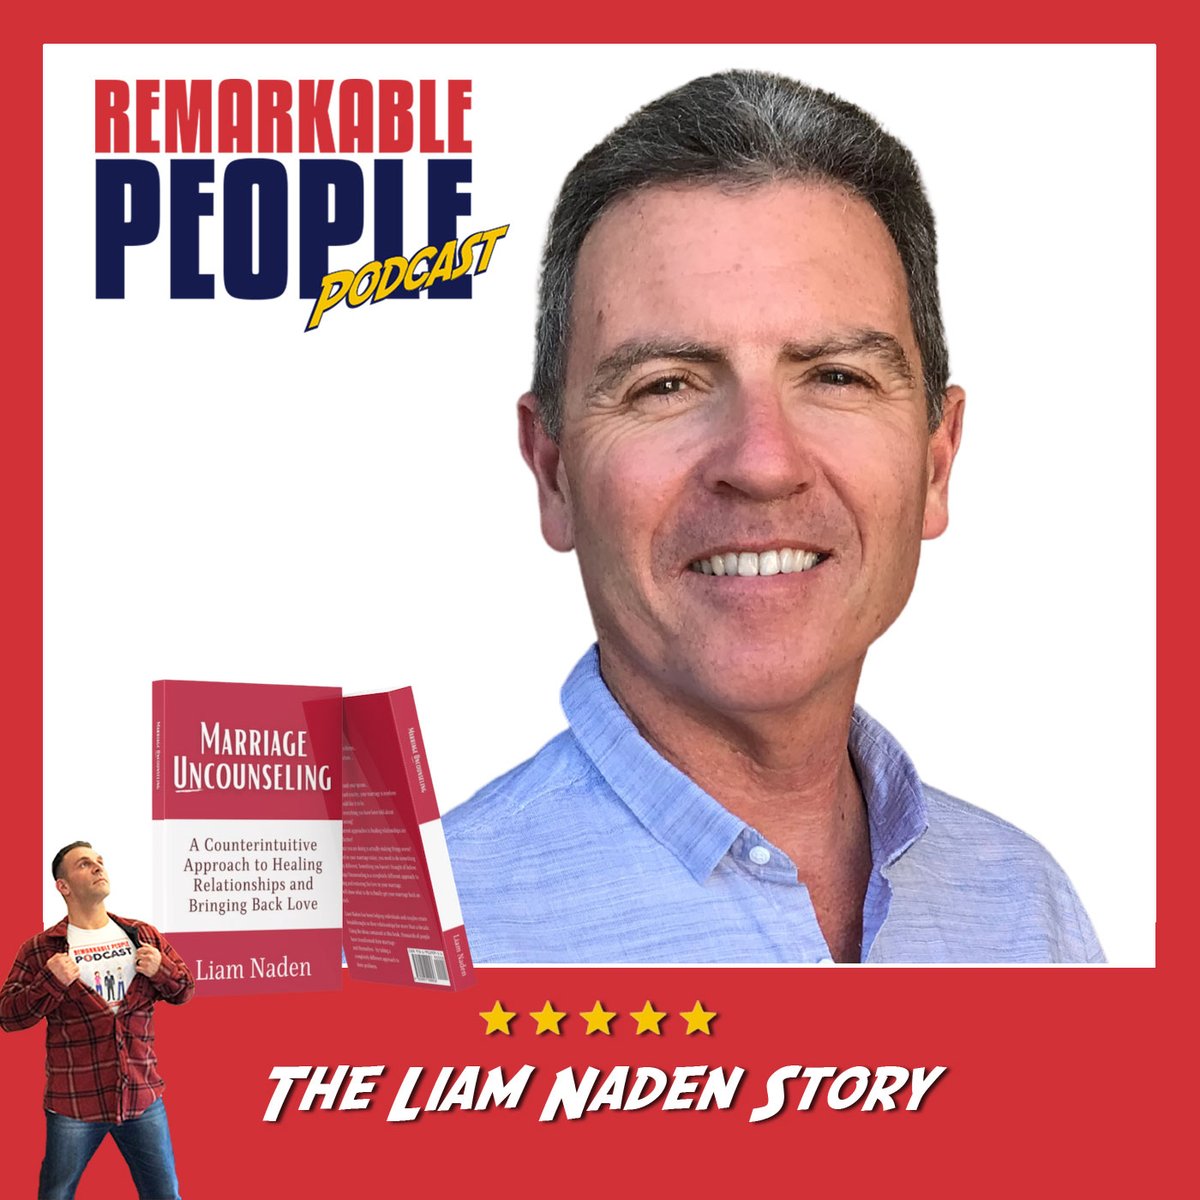 Do you believe in second chances? If not this episode is for you.

You can listen the full episode on davidpasqualone.com/LiamNaden

#liamnaden #motivation #RemarkablePeople #podcast #davidpasqualone #SecondLife #entrepreneurship #IrishCatholic